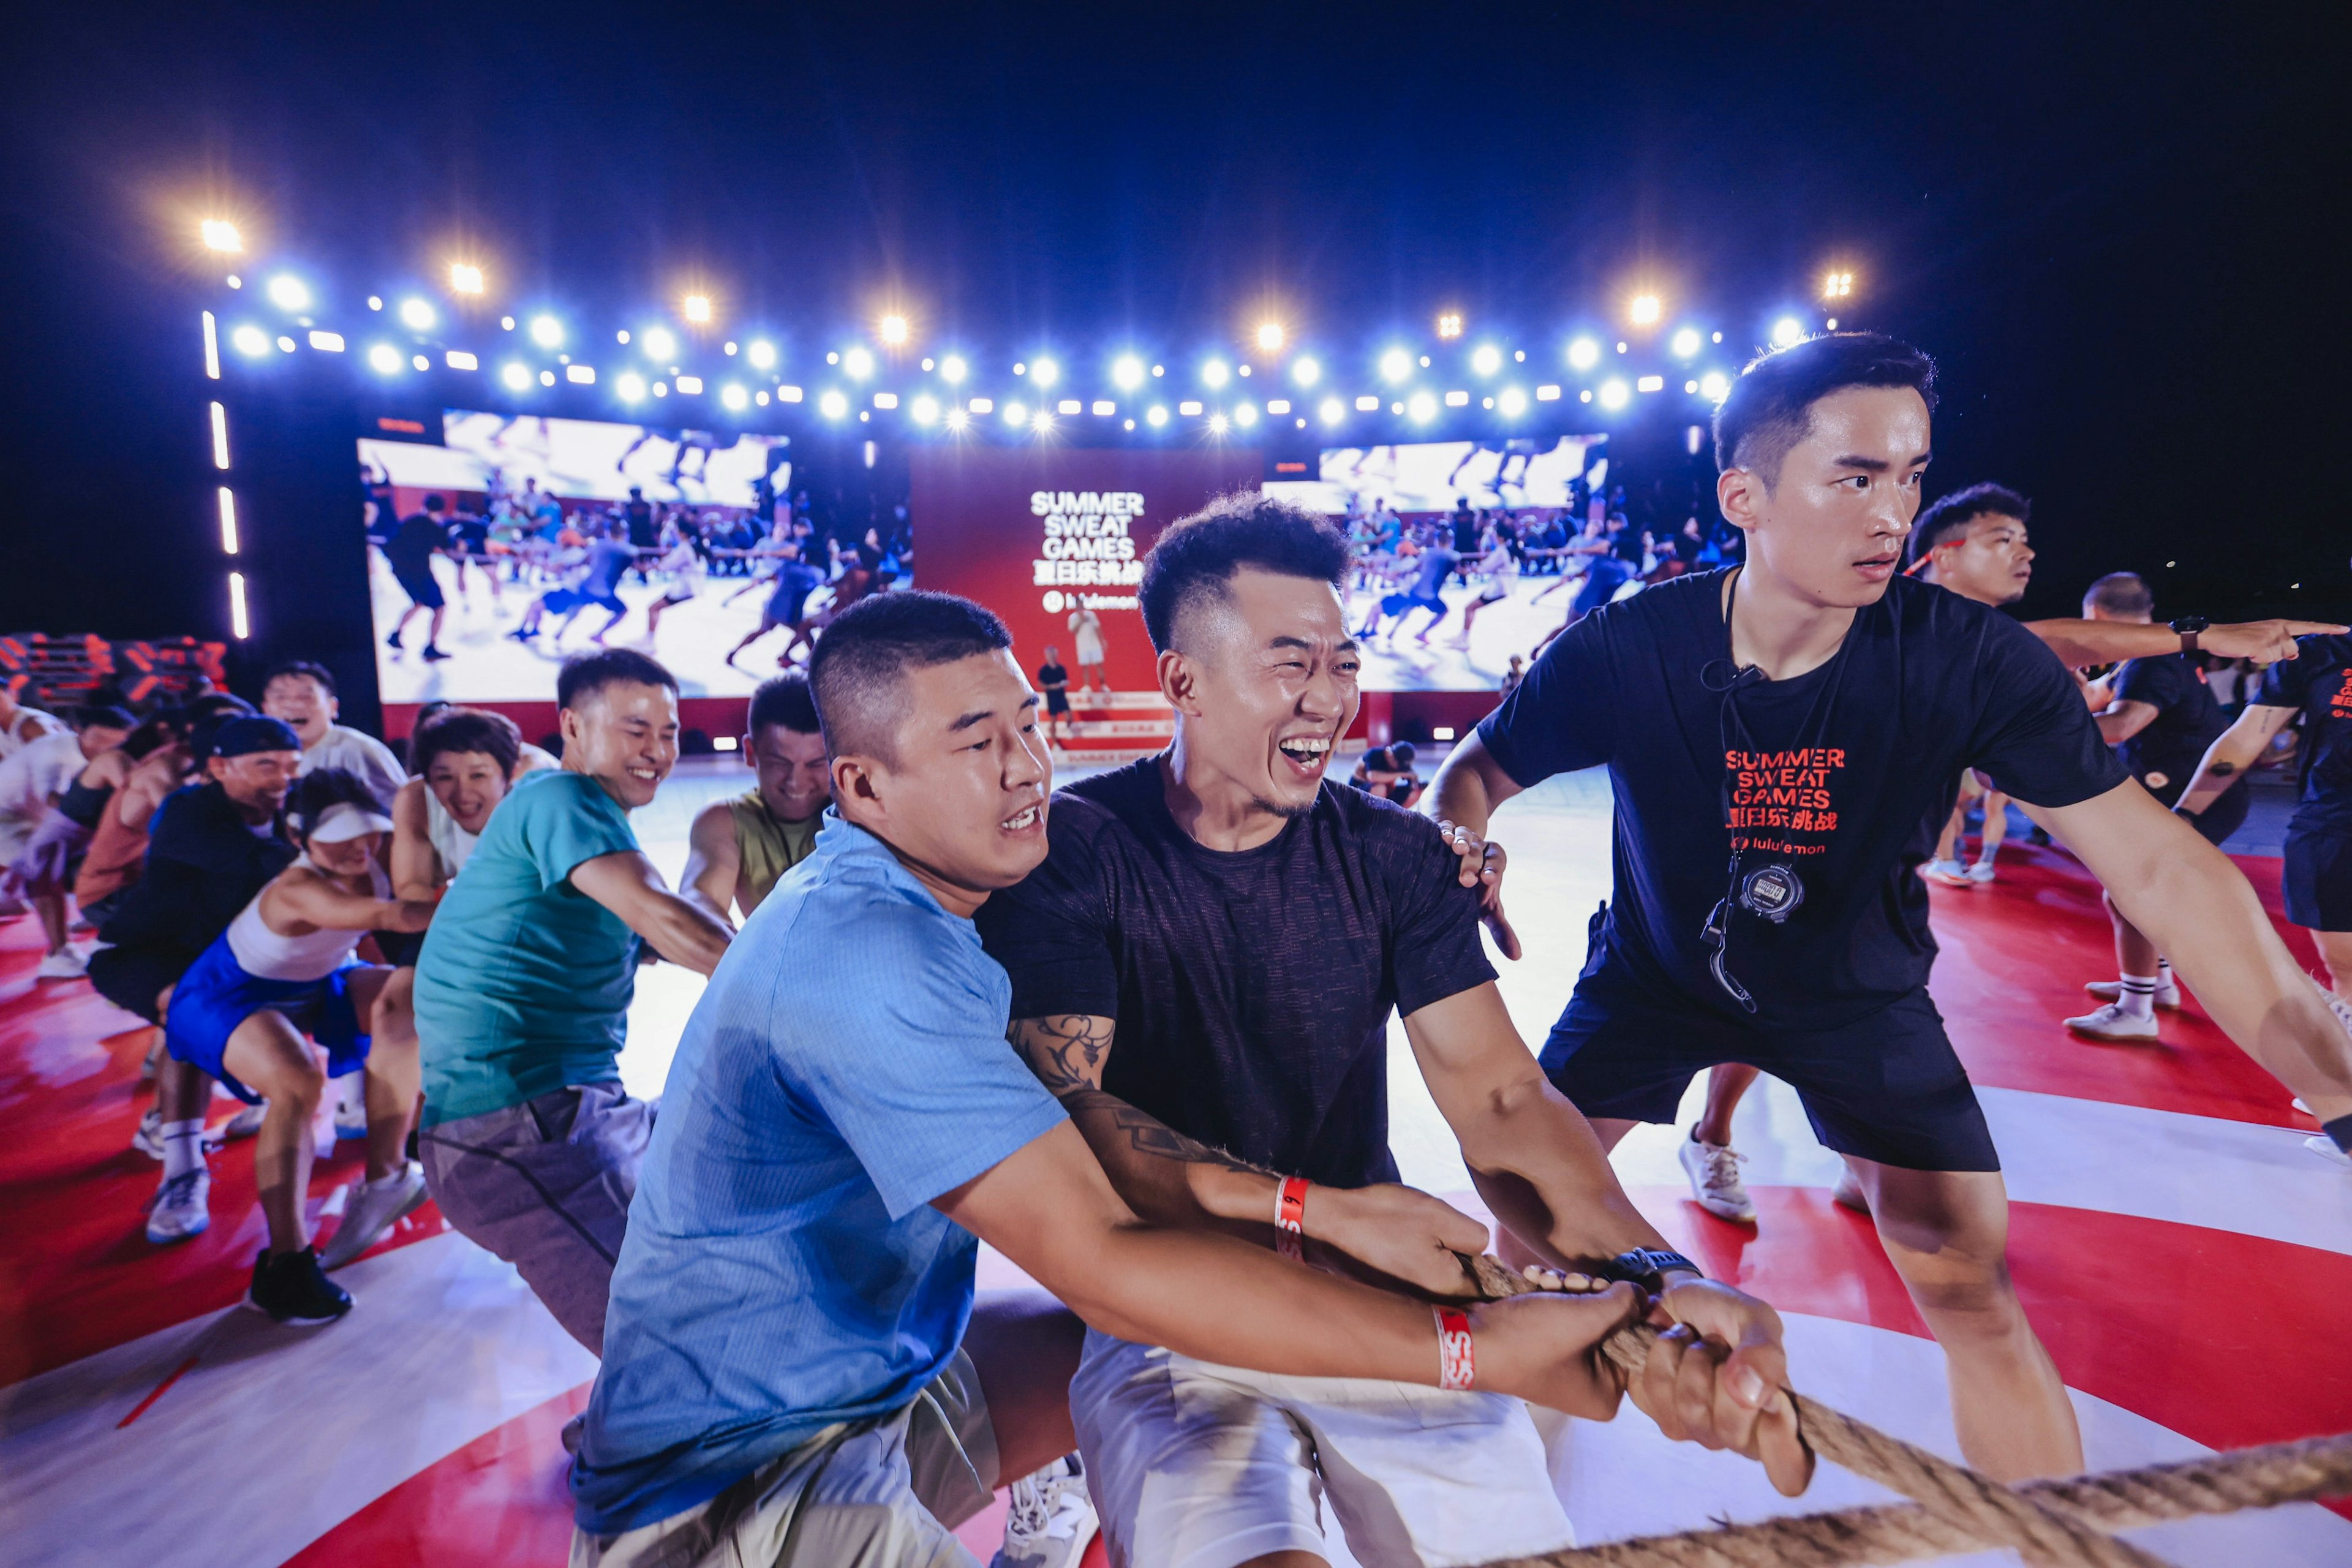 Lululemon’s Summer Sweat Games expanded to 36 cities across mainland China in 2023. Photo: Lululemon
